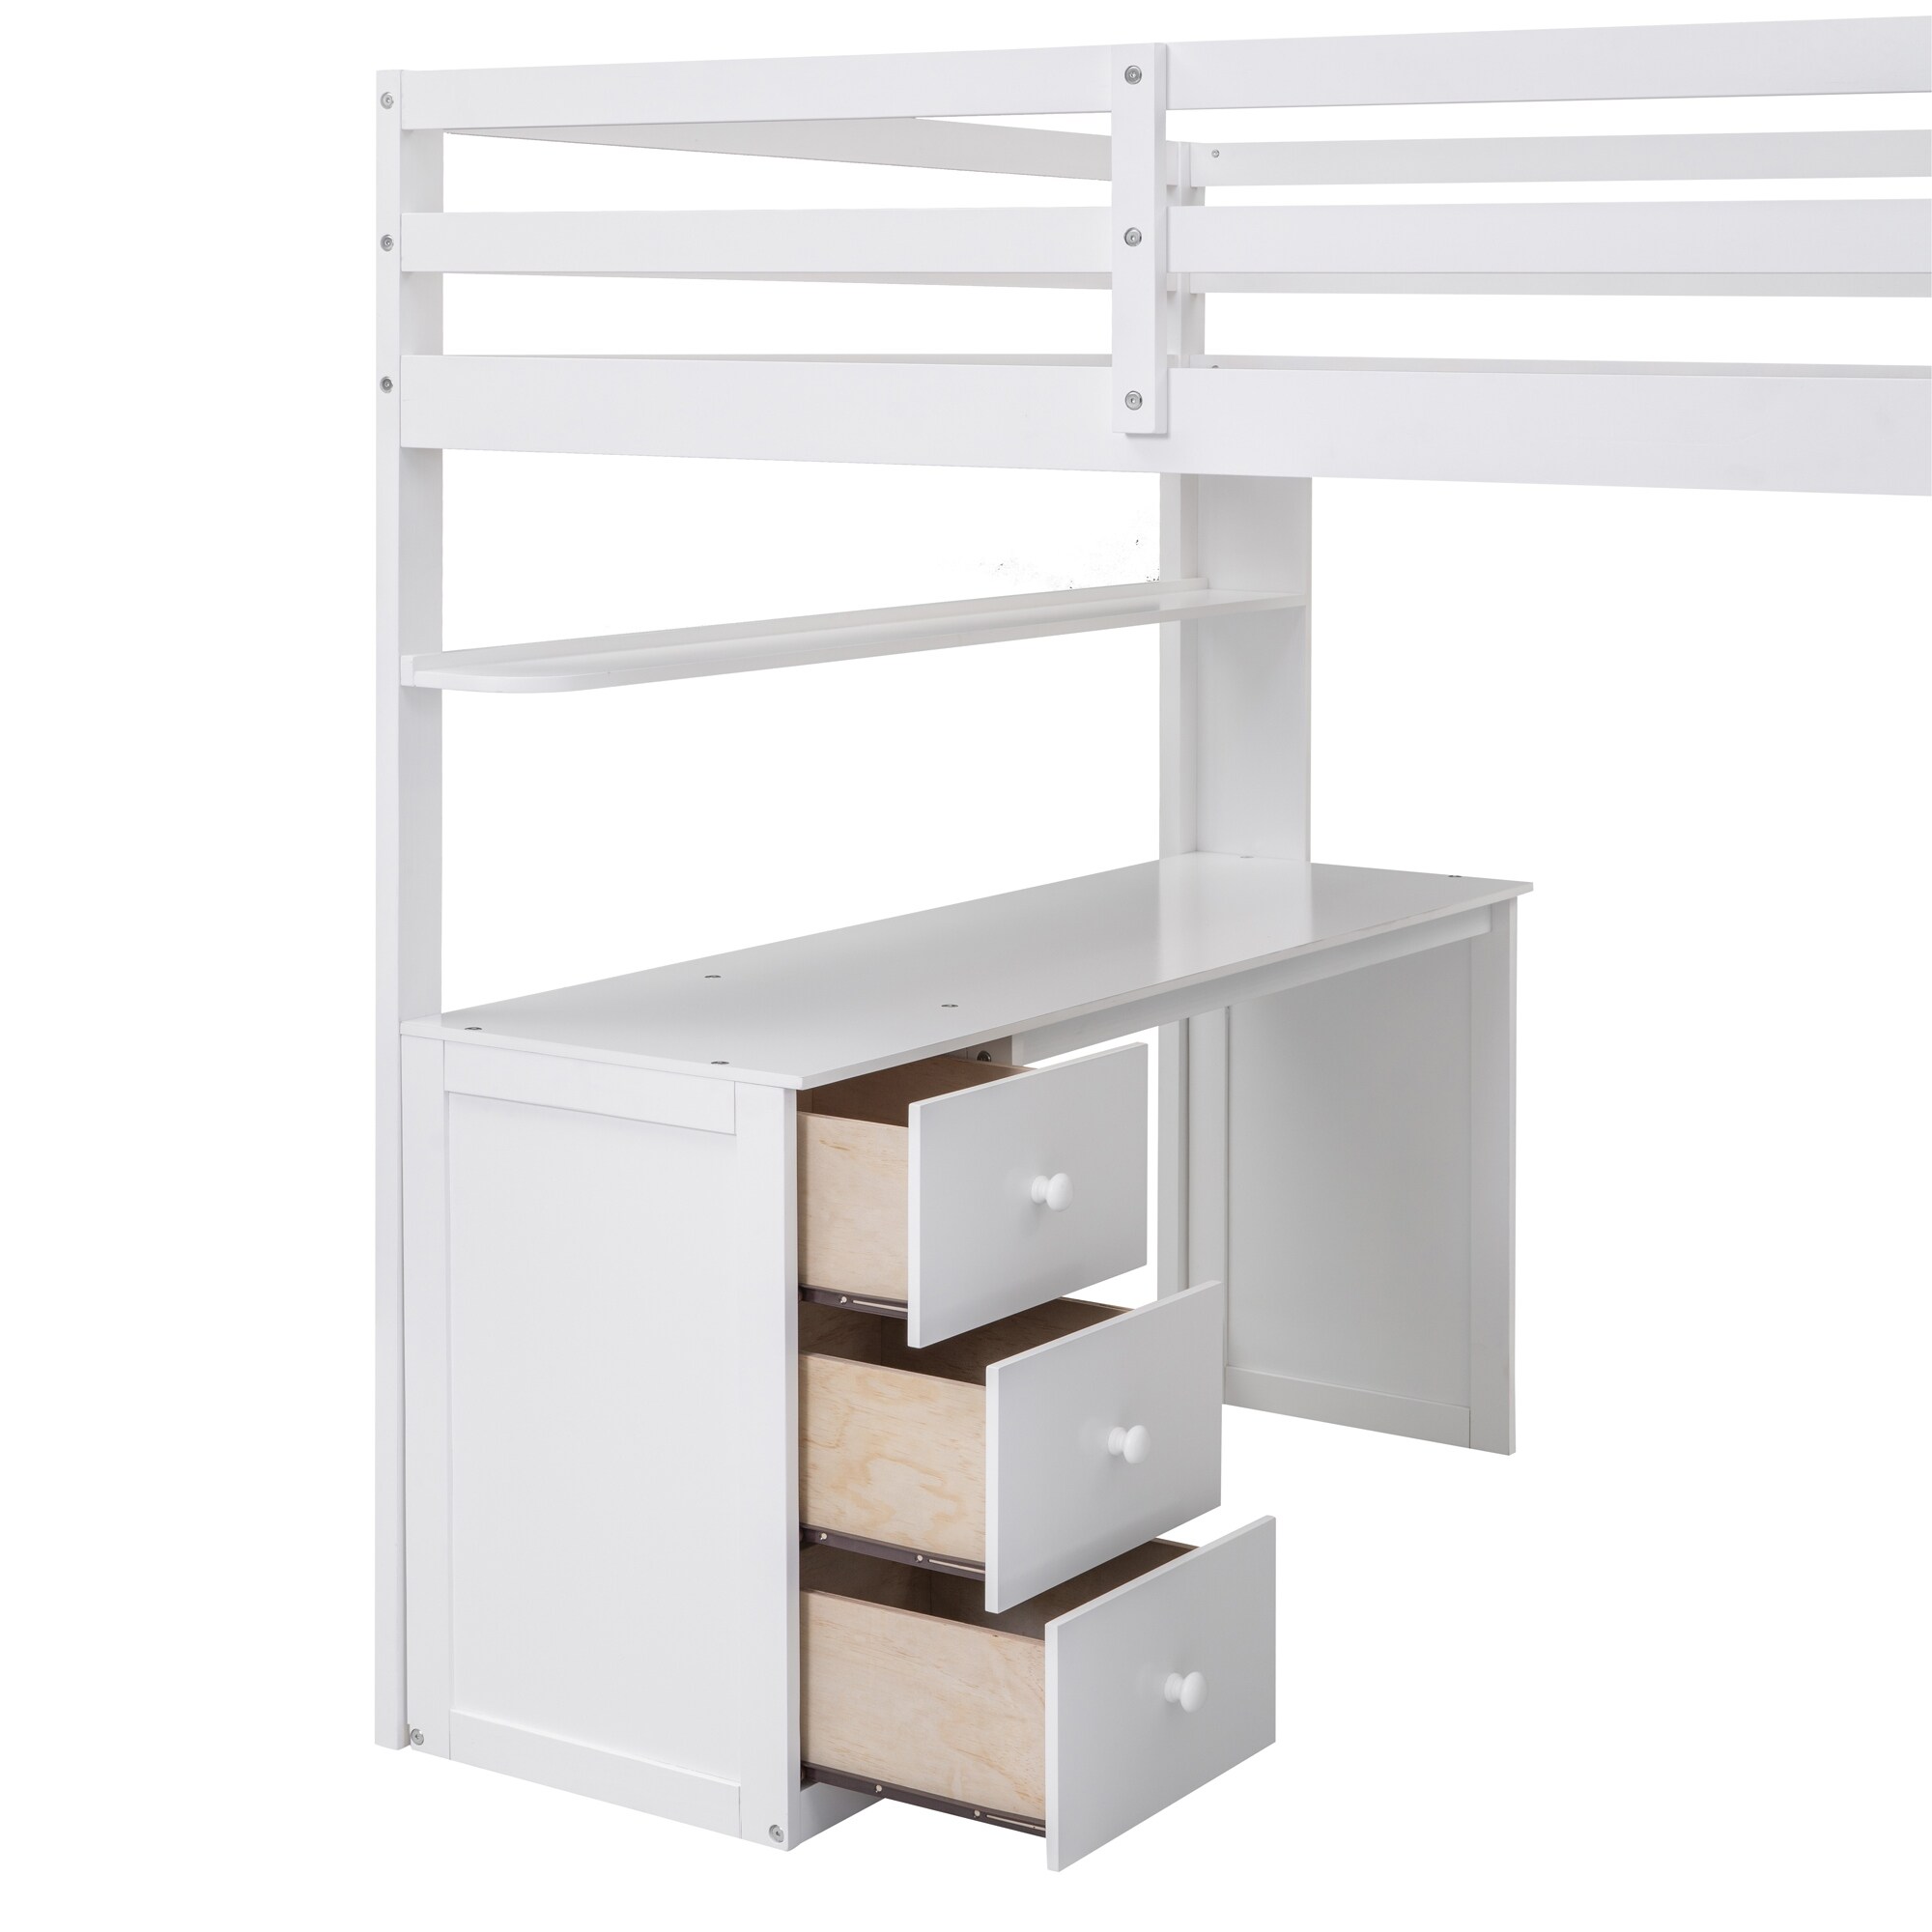 Wooden Space-Saving Loft Bed with Drawers, Desk & Wardrobe